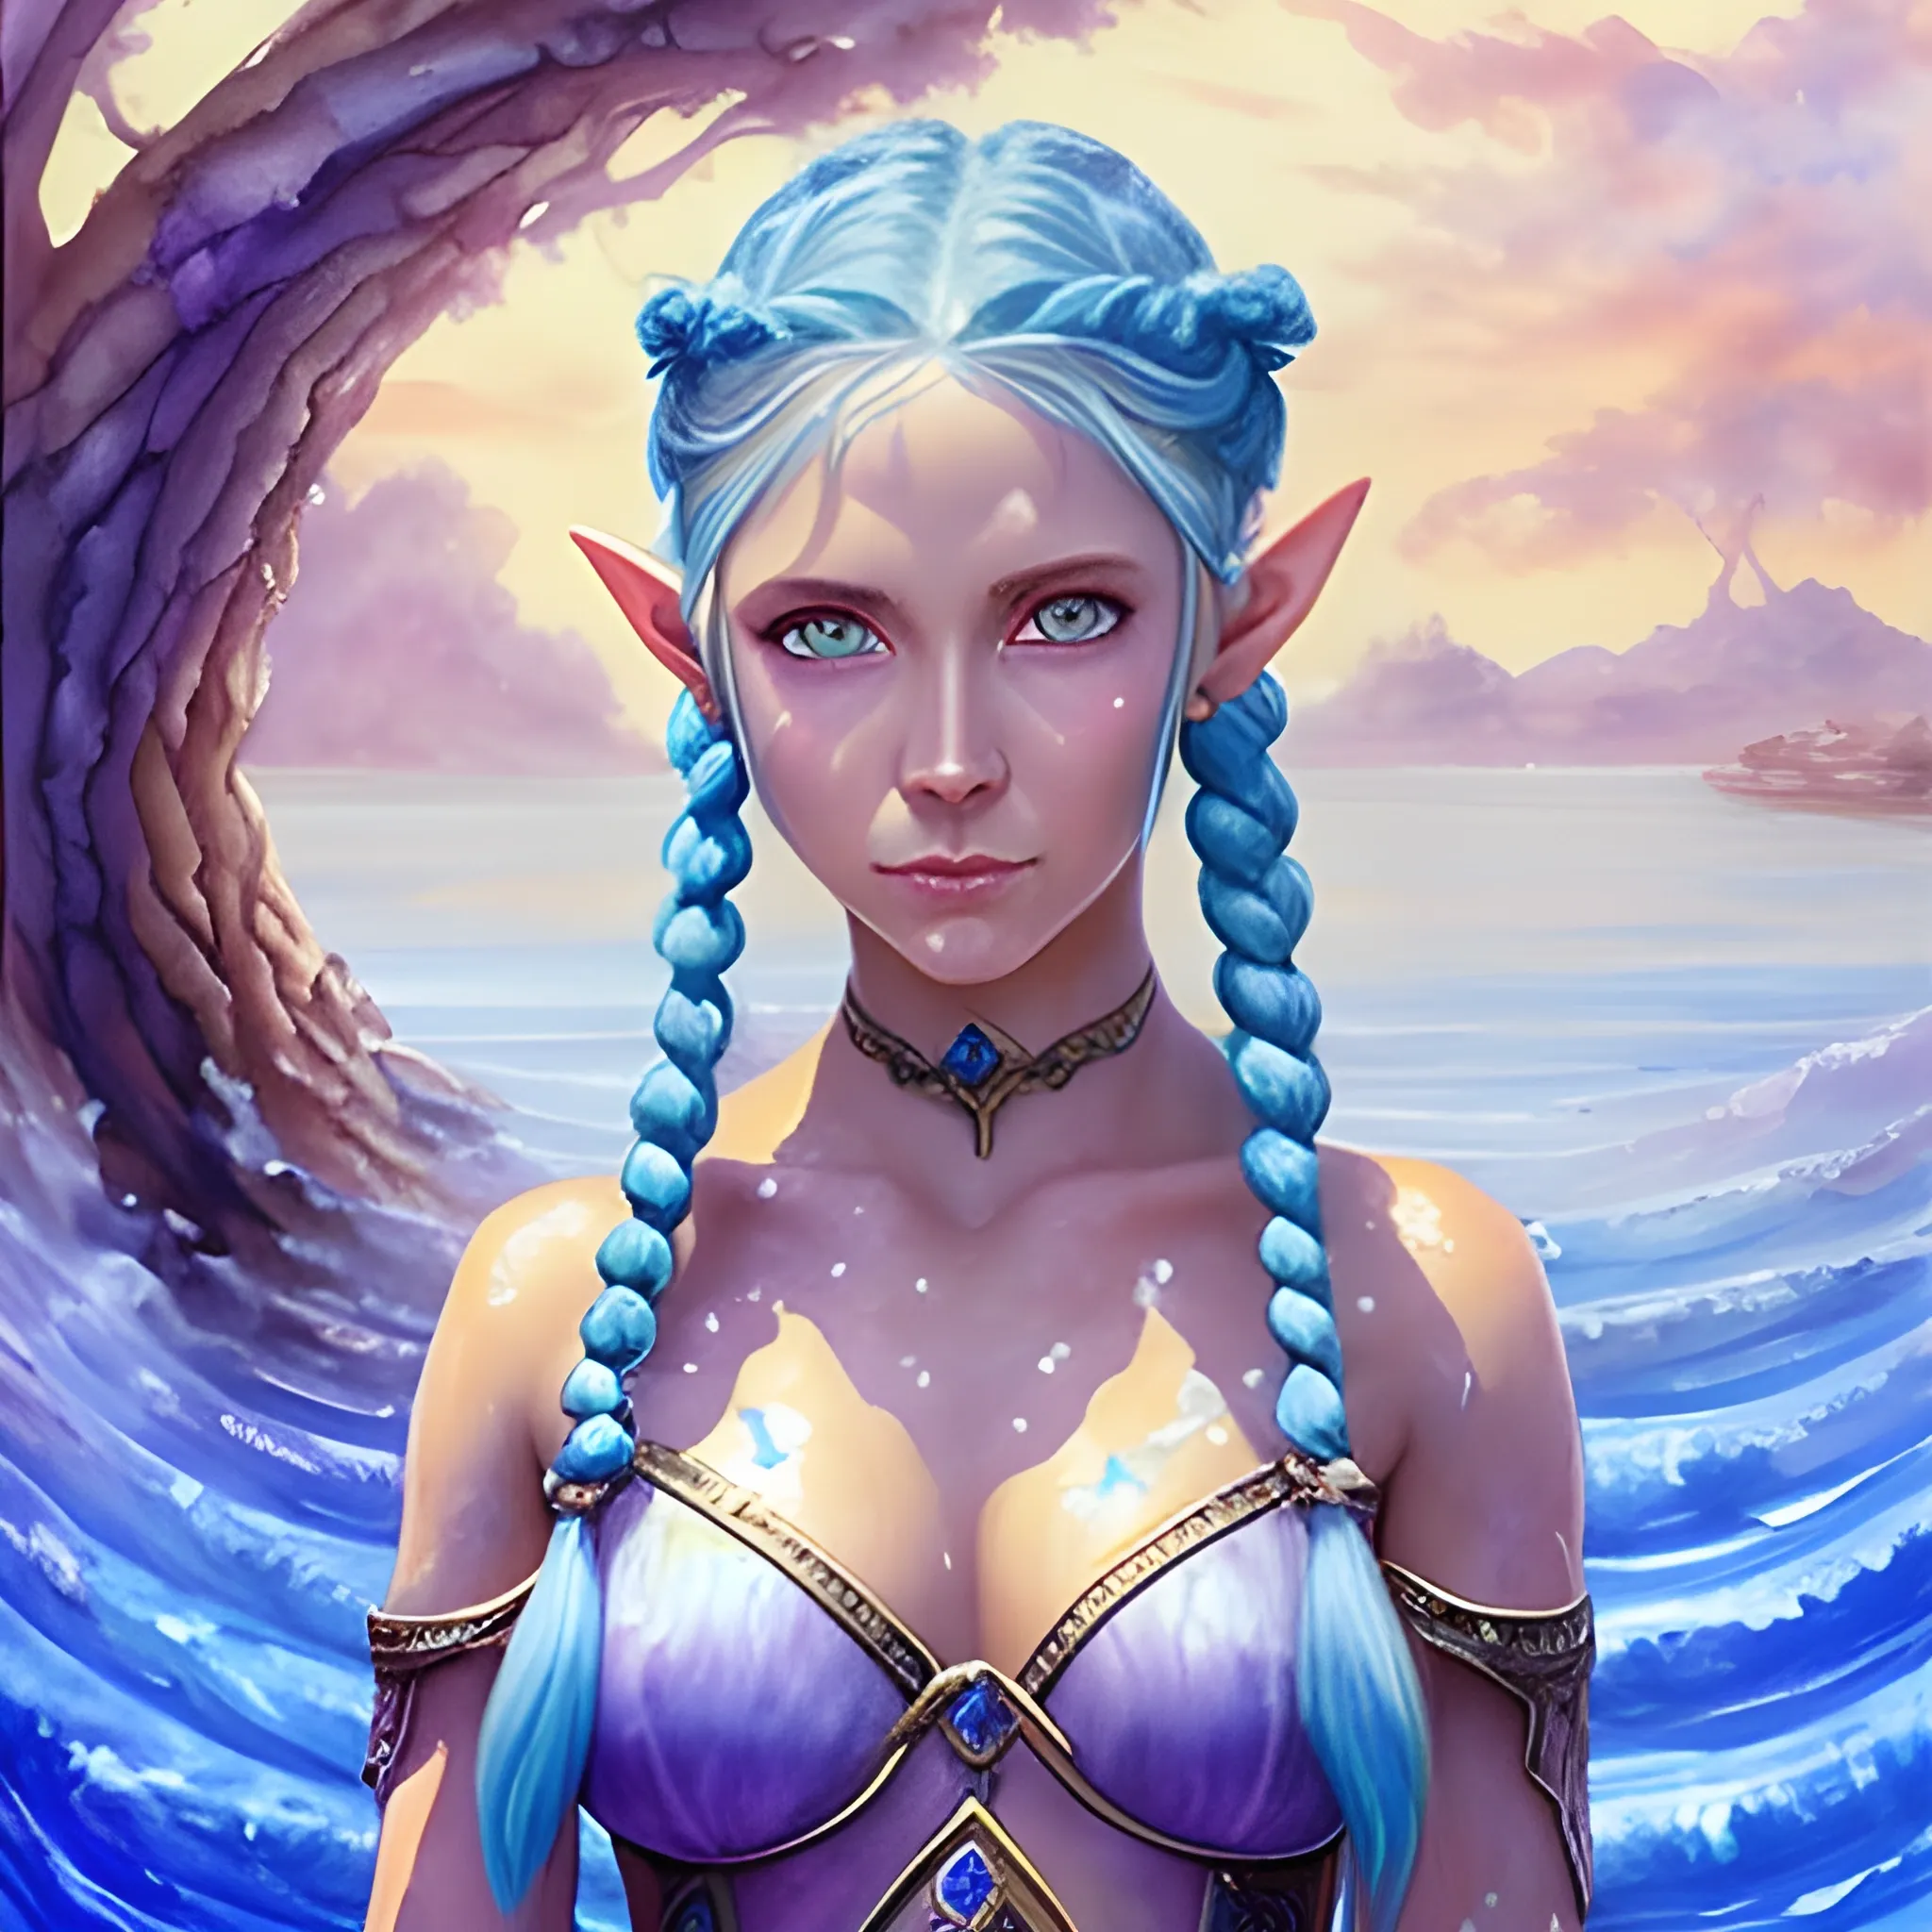 Water female 
elf with light blue skin, purple eyes, Blue braided hair, oil painting
, Water Color